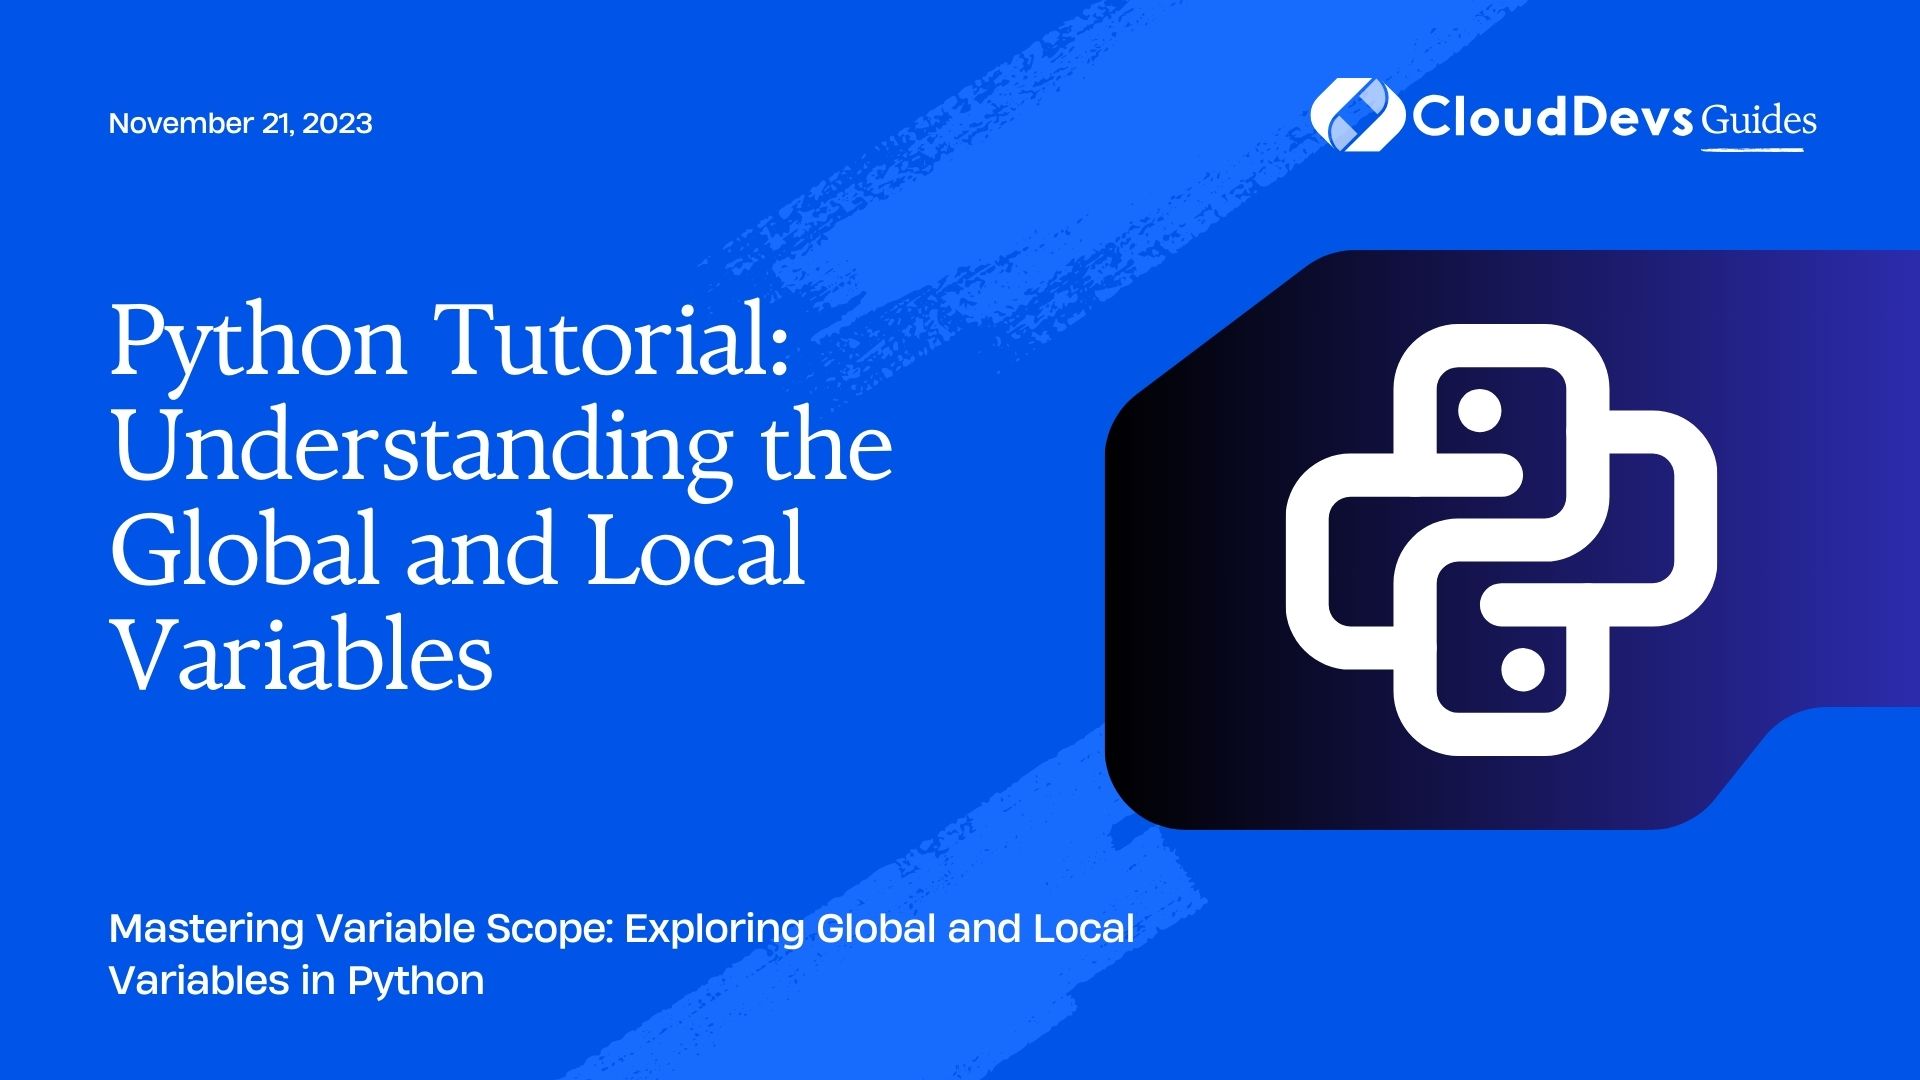 Python Tutorial: Understanding the Global and Local Variables